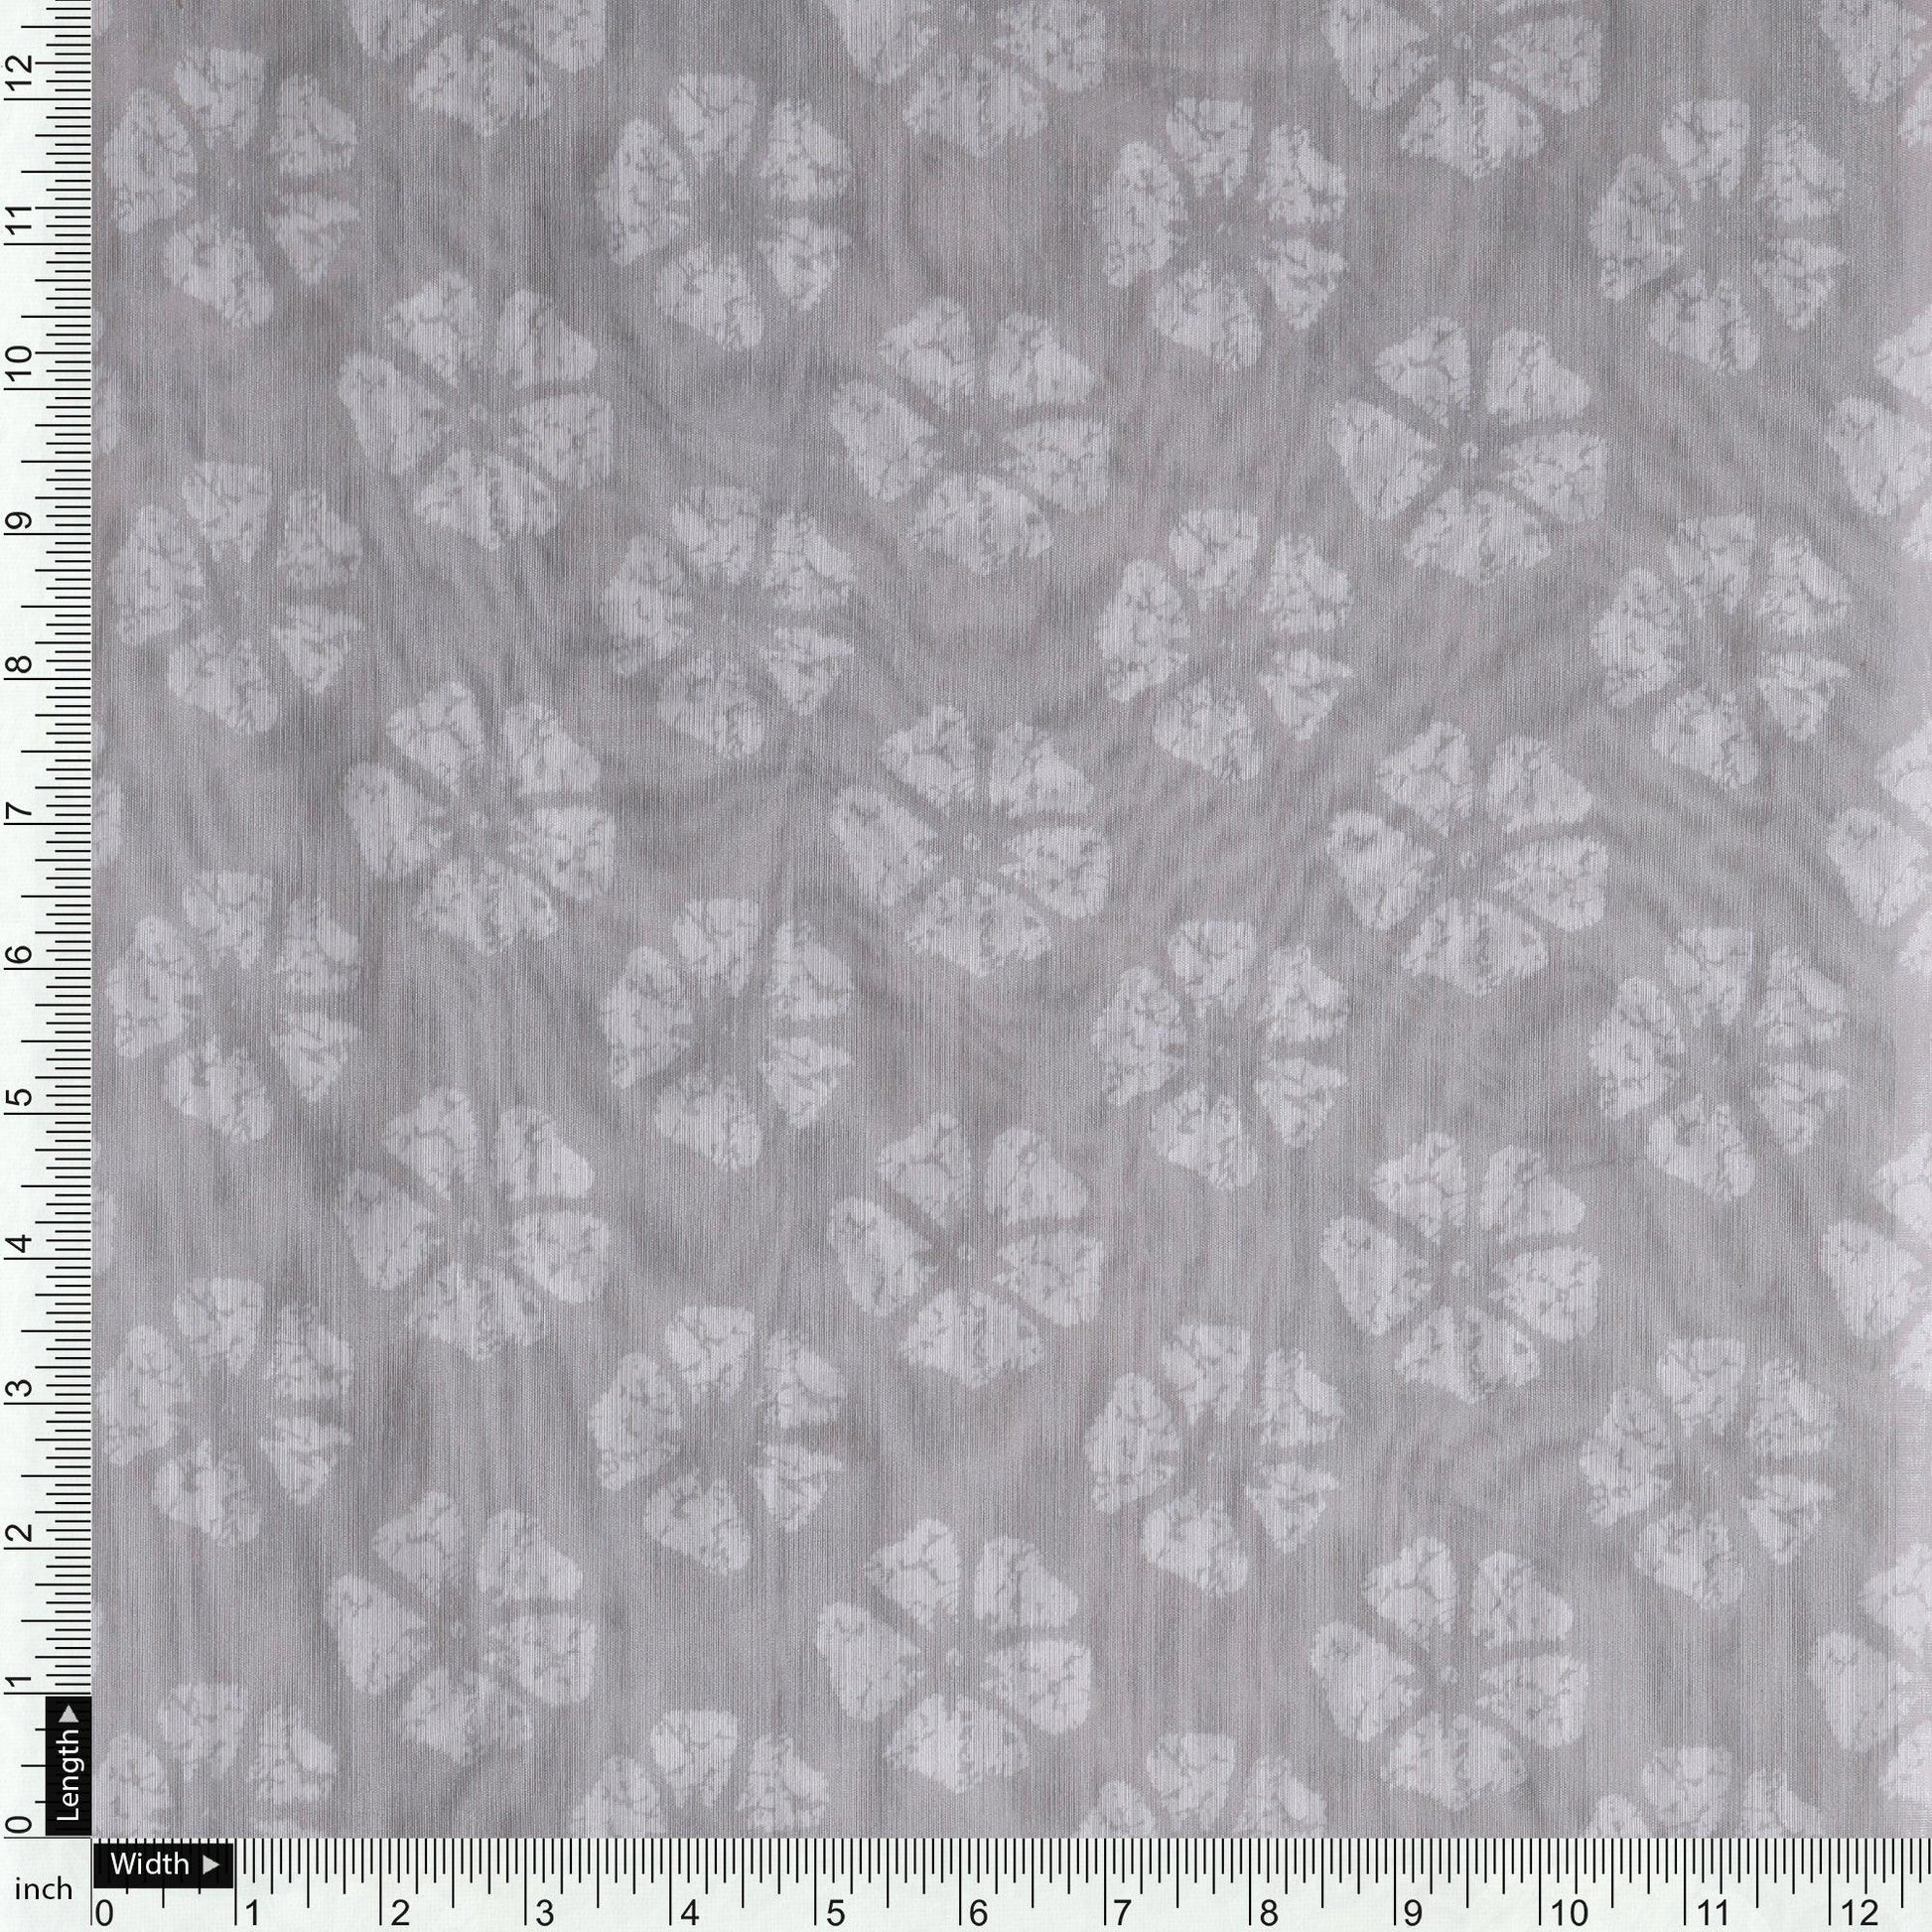 Chanderi Fabric with Gray Floral & Butti Design - FAB VOGUE Studio®